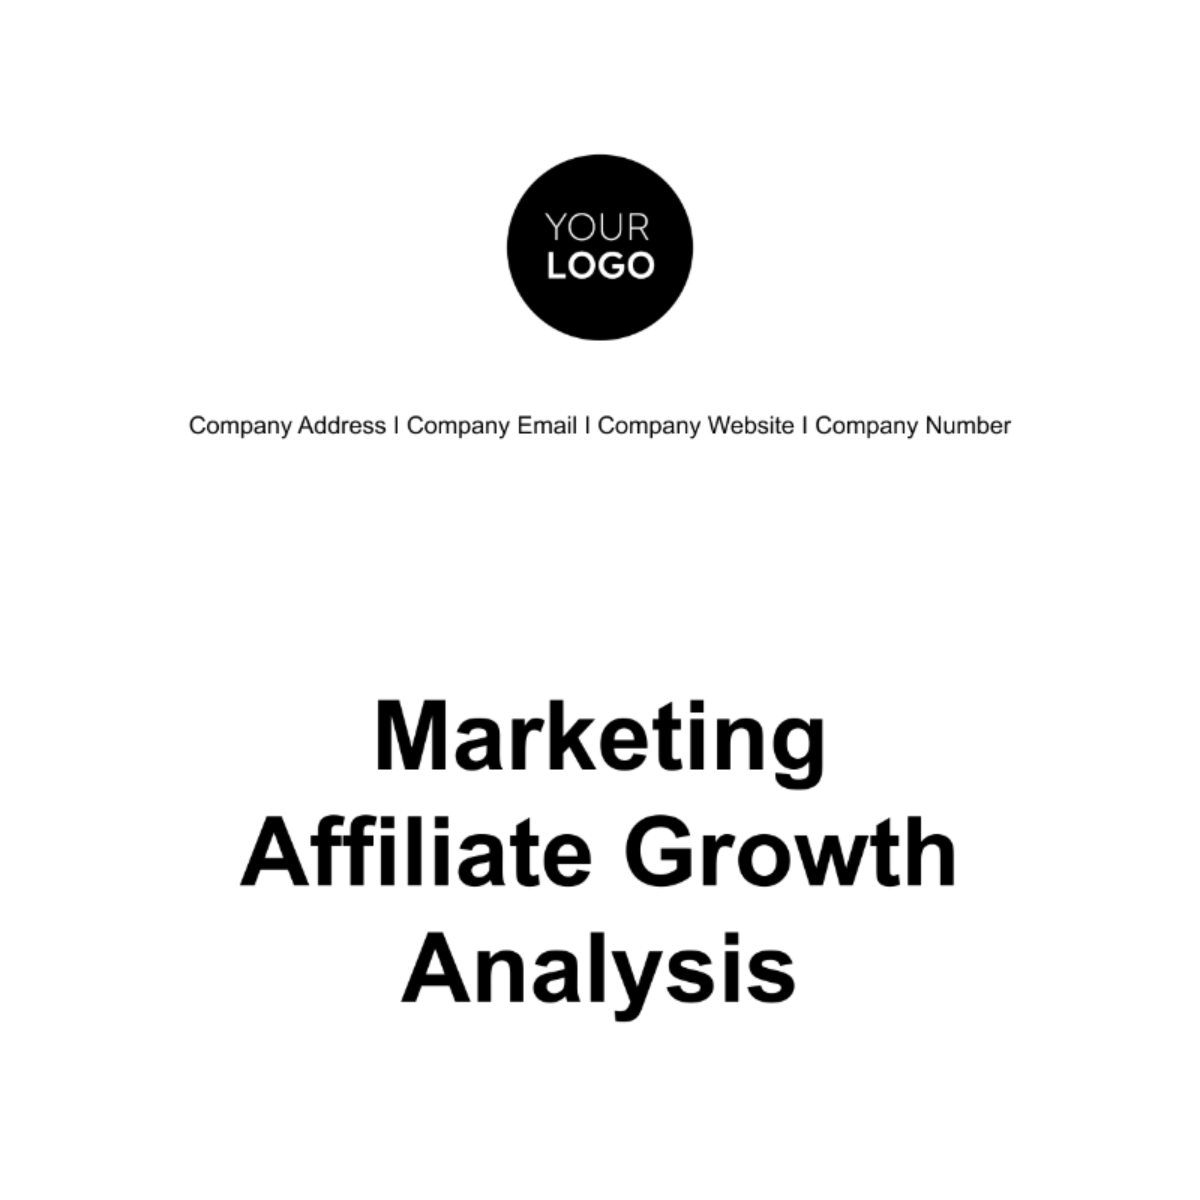 Free Marketing Affiliate Growth Analysis Template